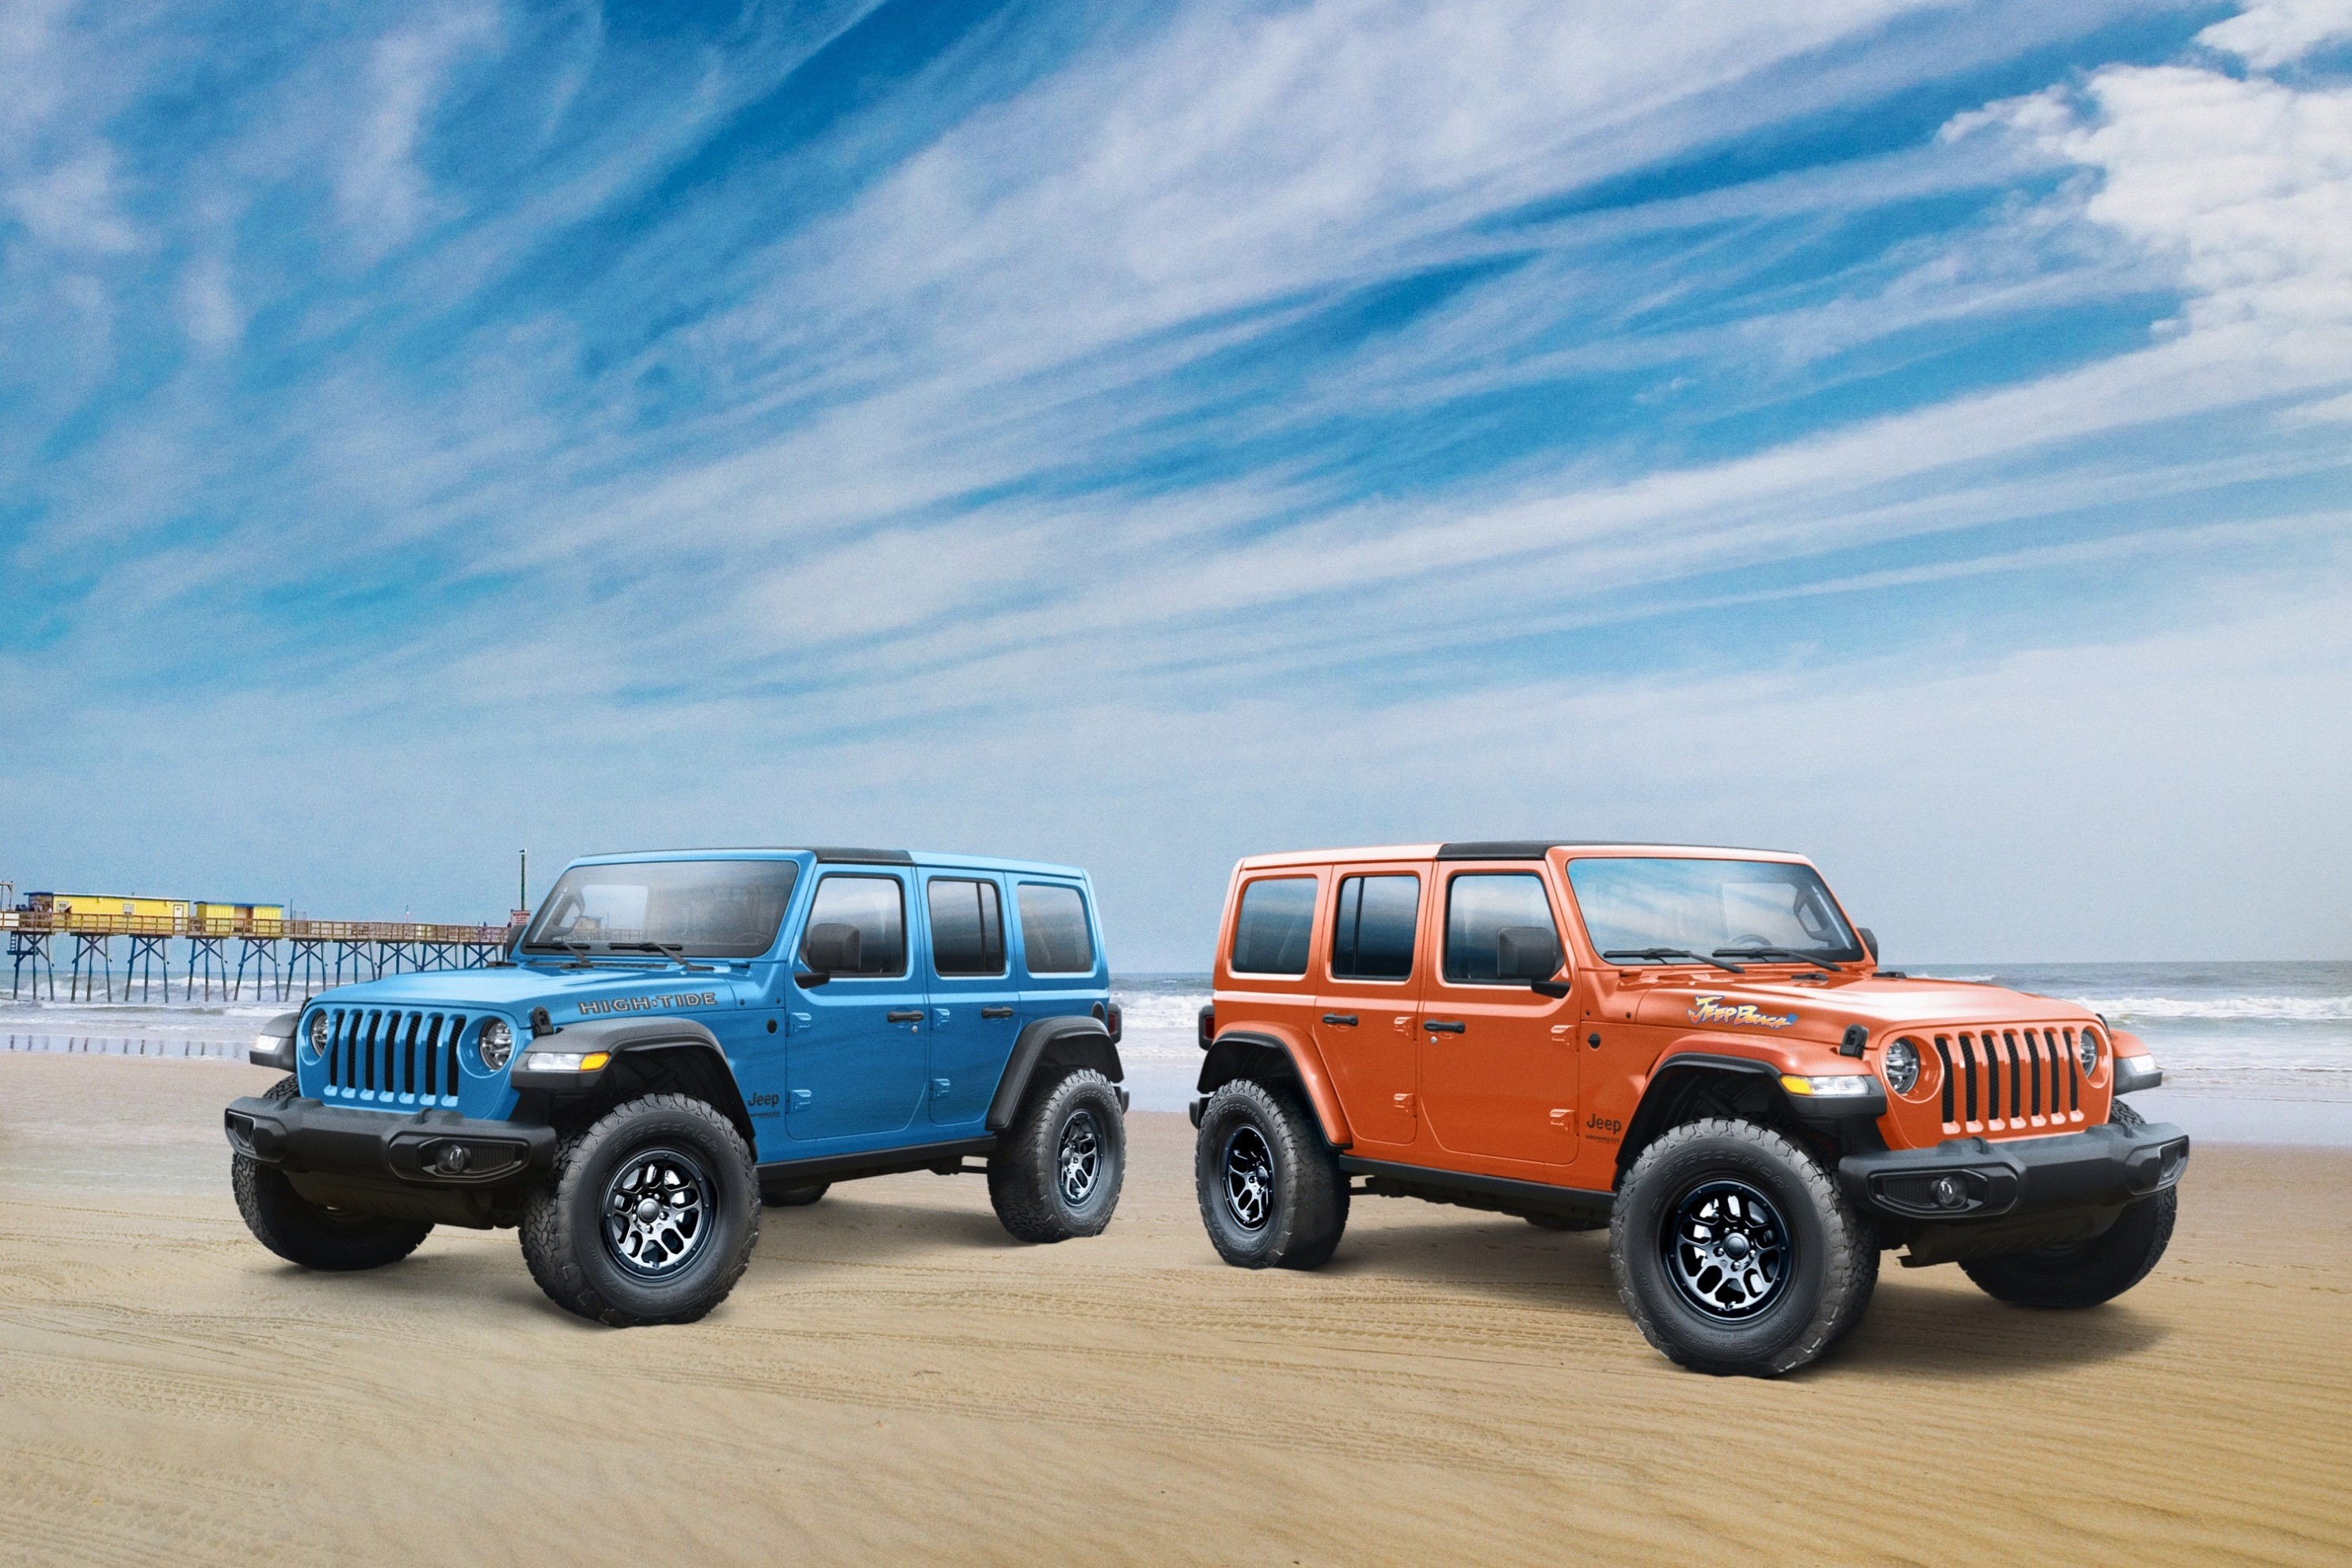 Jeep Recalls Wrangler Over “Unnecessary” Frame Stud That May Puncture Fuel  Tank - autoevolution